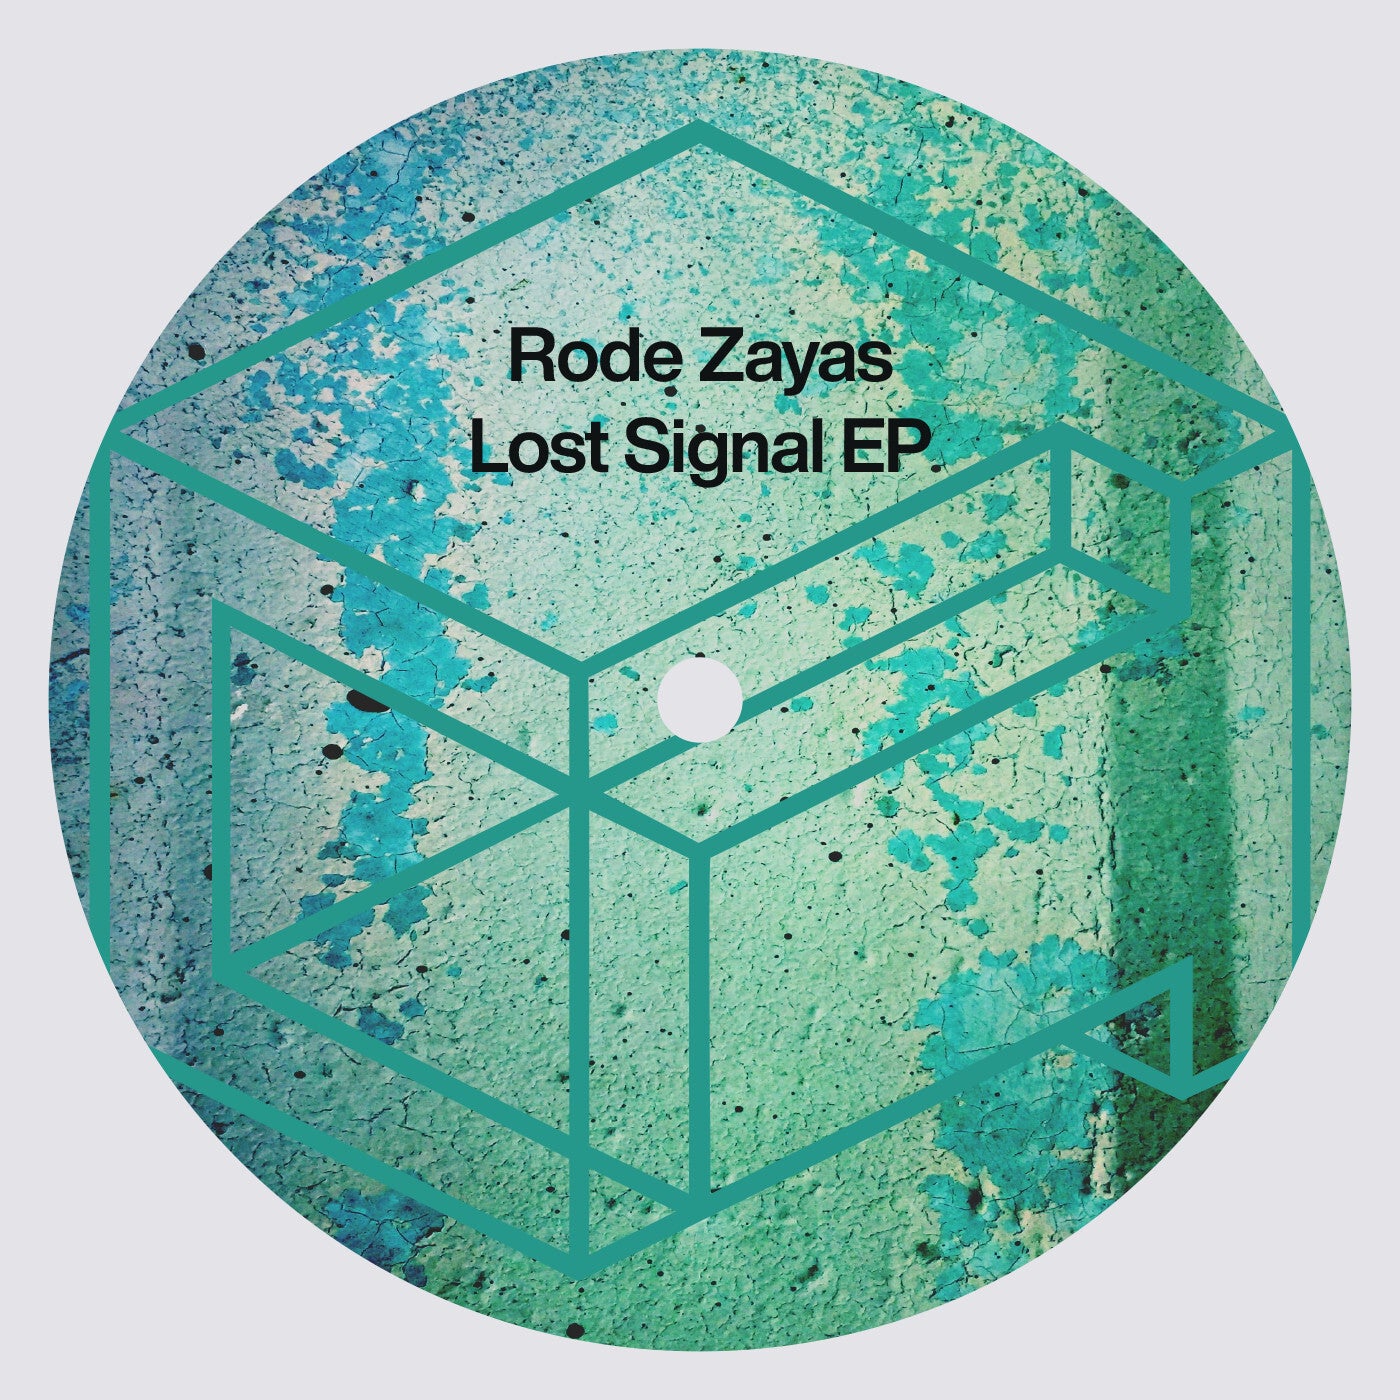 Lost Signal EP